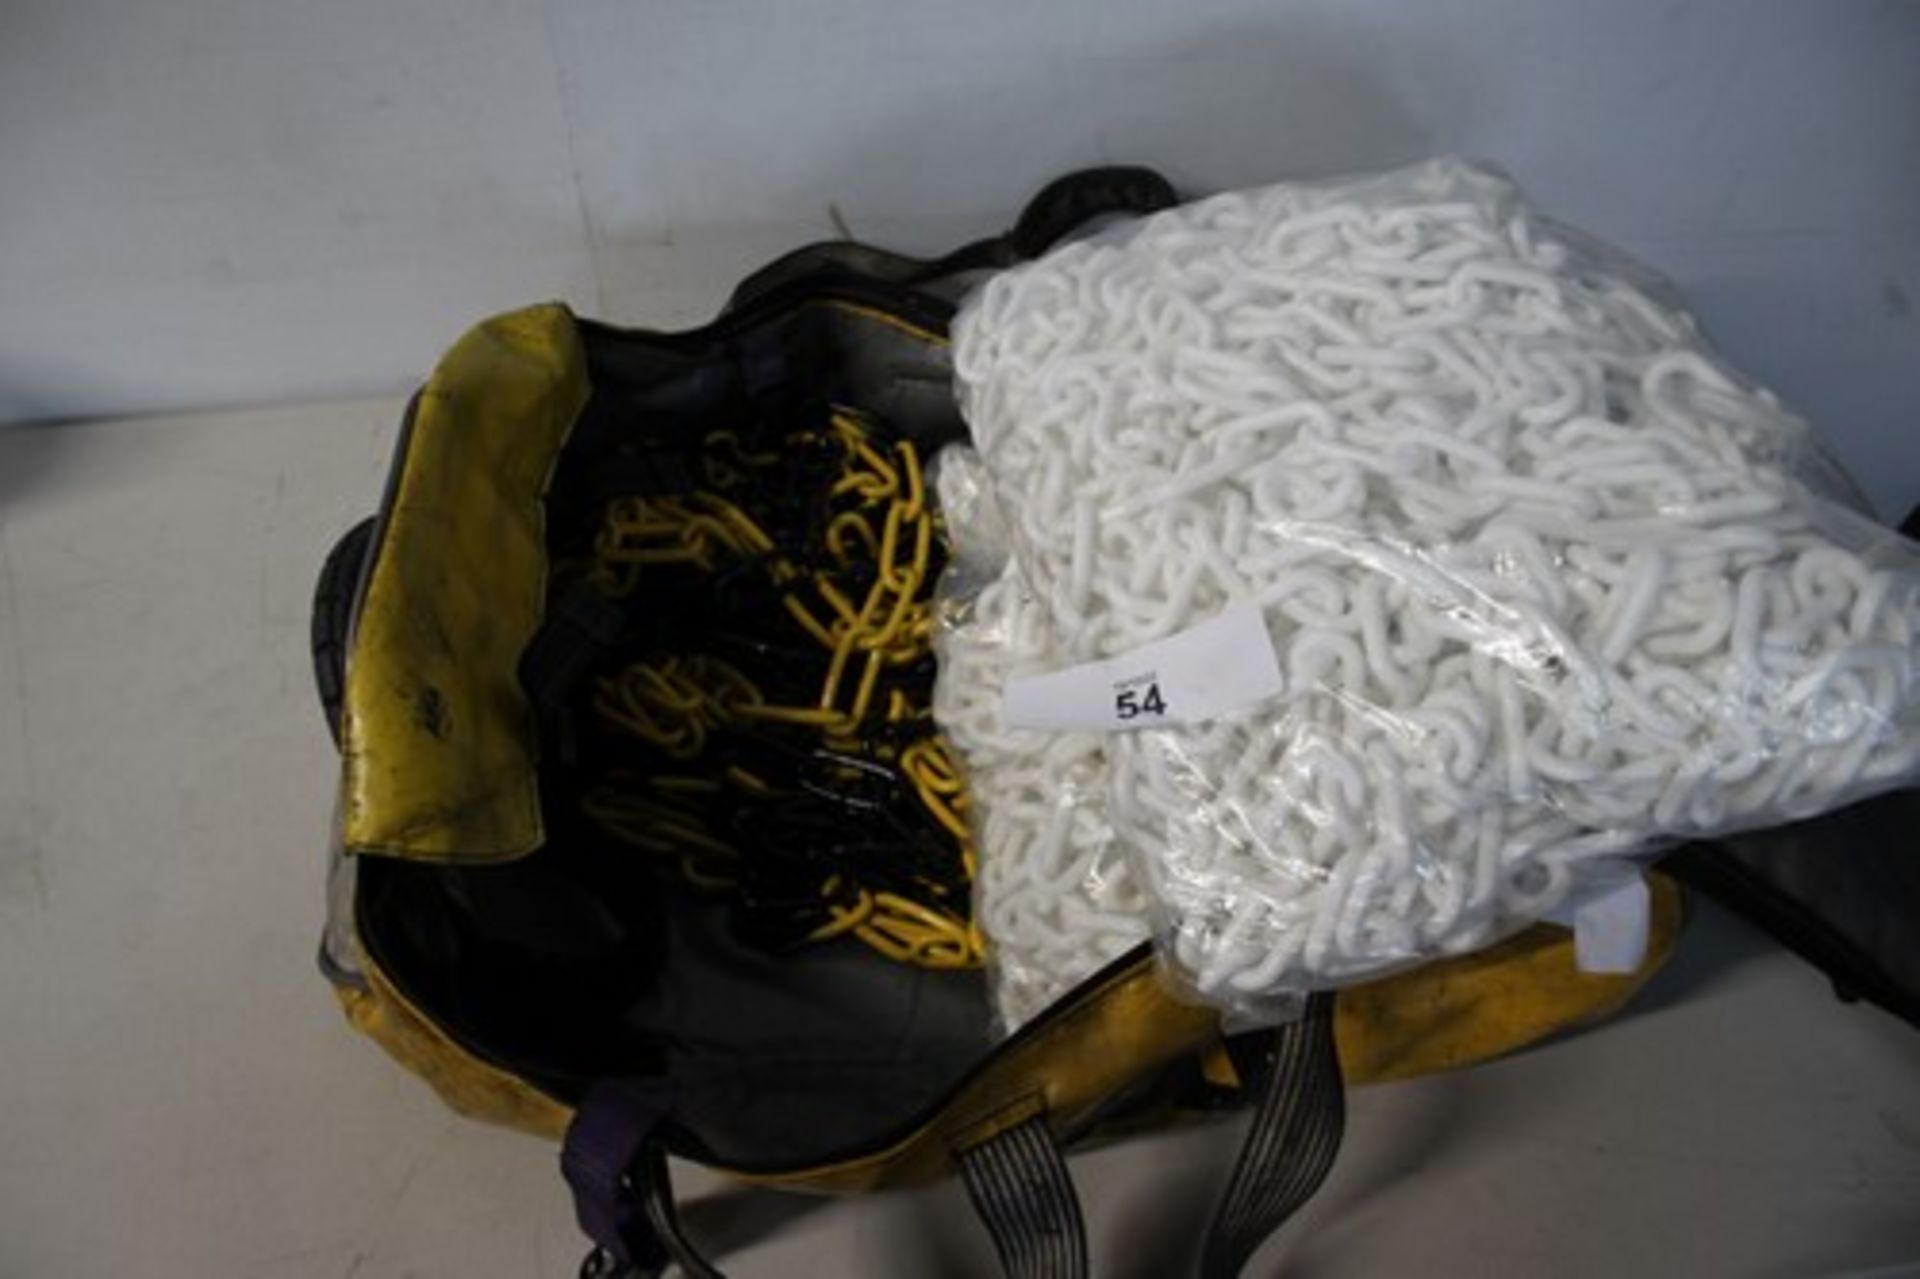 1 x 15m length of yellow and black metal chain, 2 x approximately 24m white plastic chain in Dirty